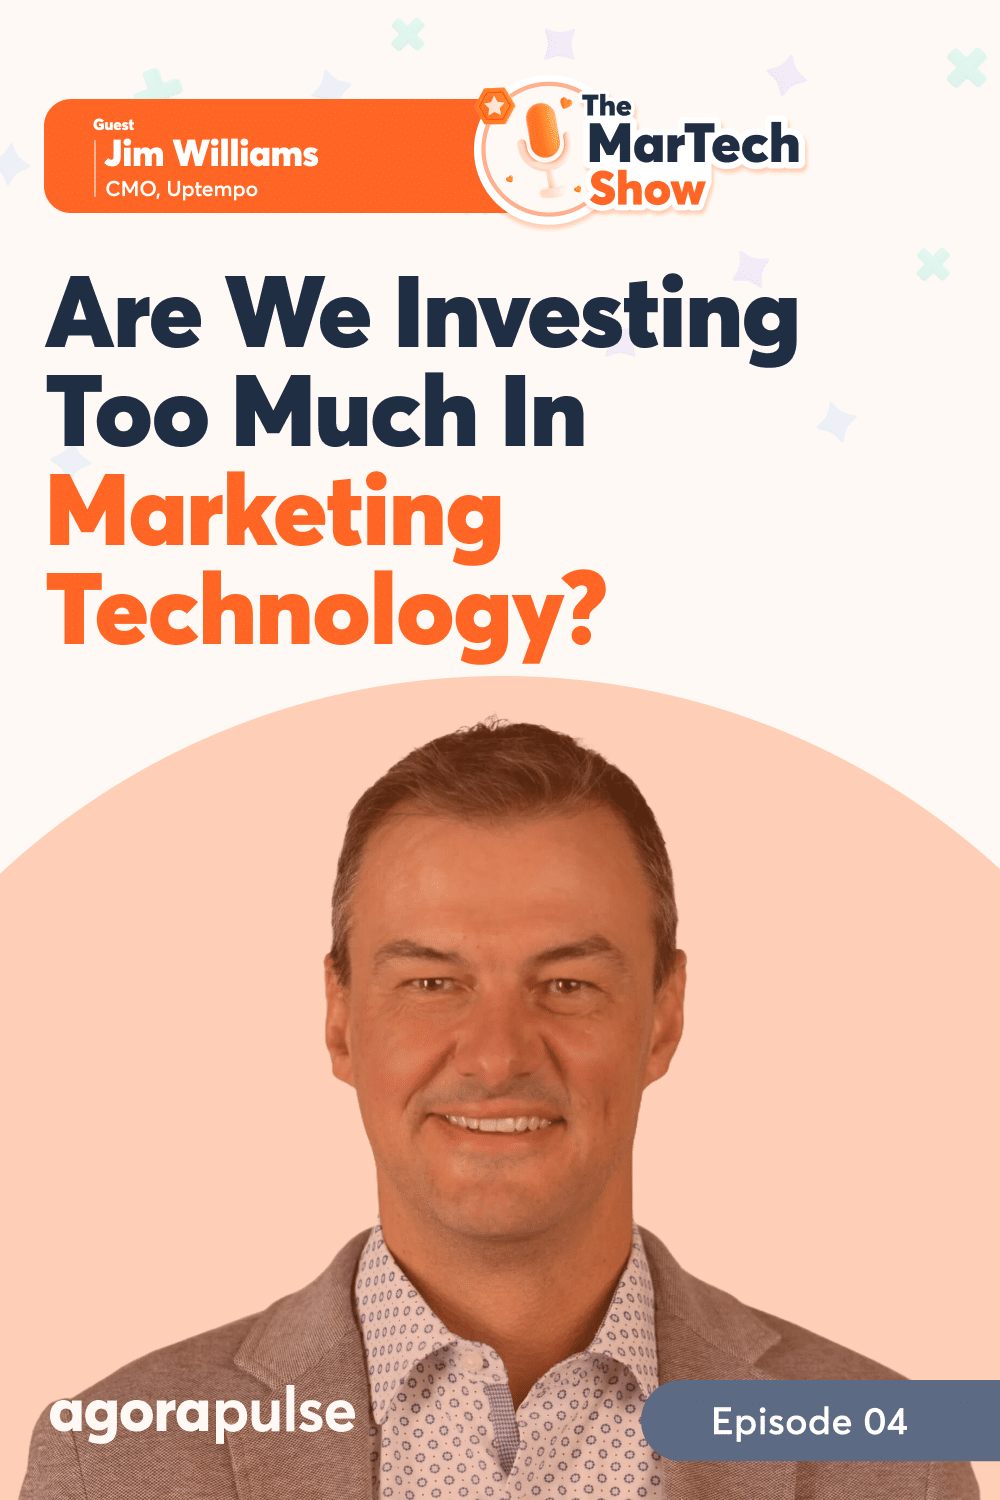 Are We Investing Too Much in Marketing Technology?